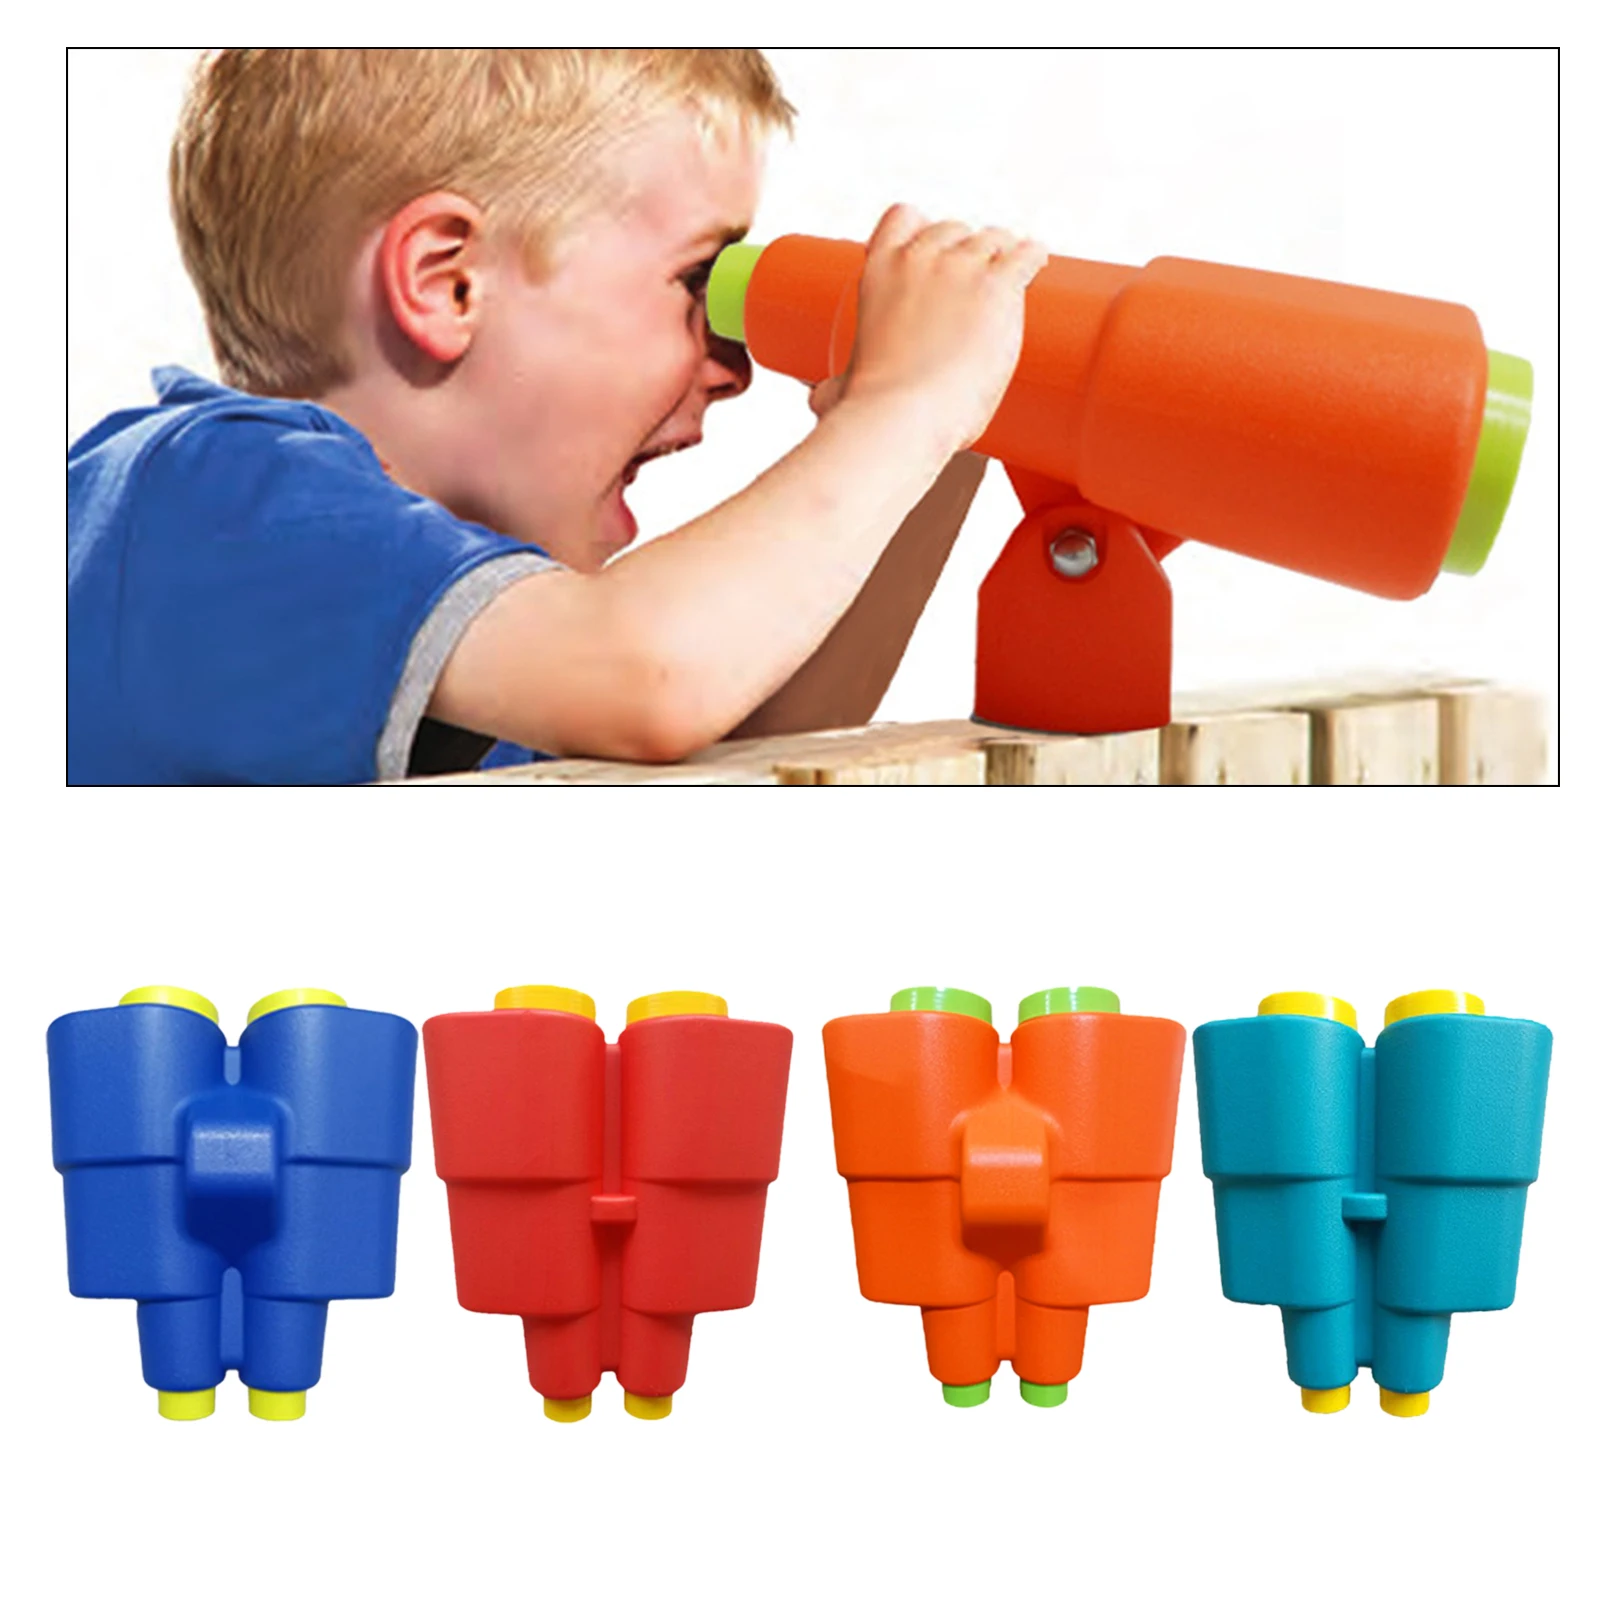 Outdoor Kids Binoculars Entertaining Telescope Playground Toy Props Game Accessories for Boys Girls Exploration Gift Ages 3+